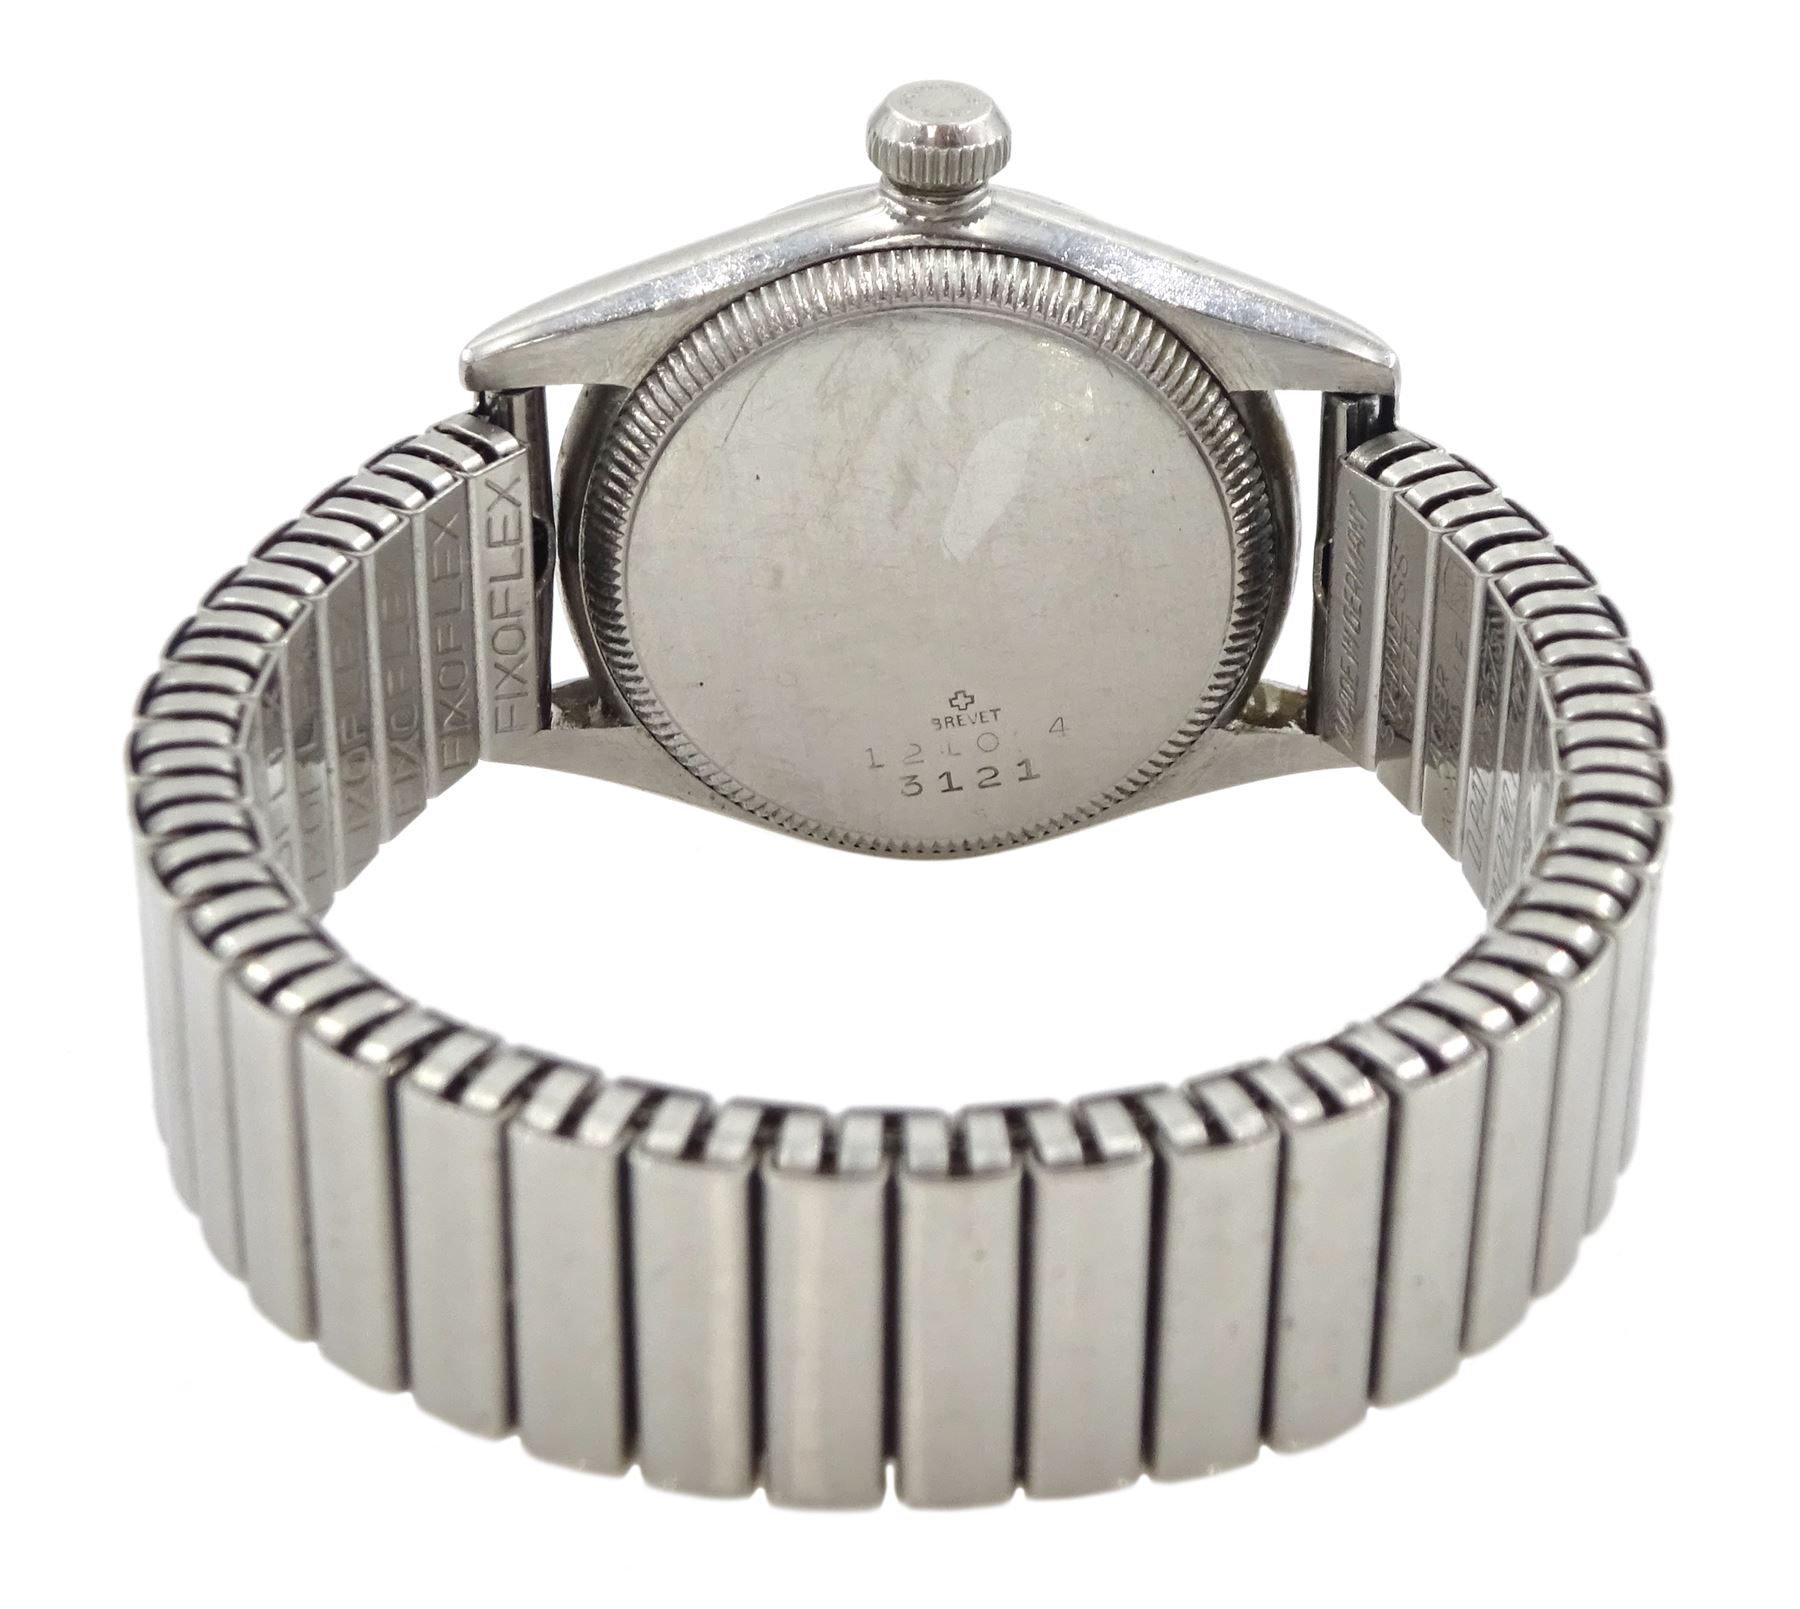 Rolex Oyster stainless steel manual wind wristwatch - Image 2 of 3